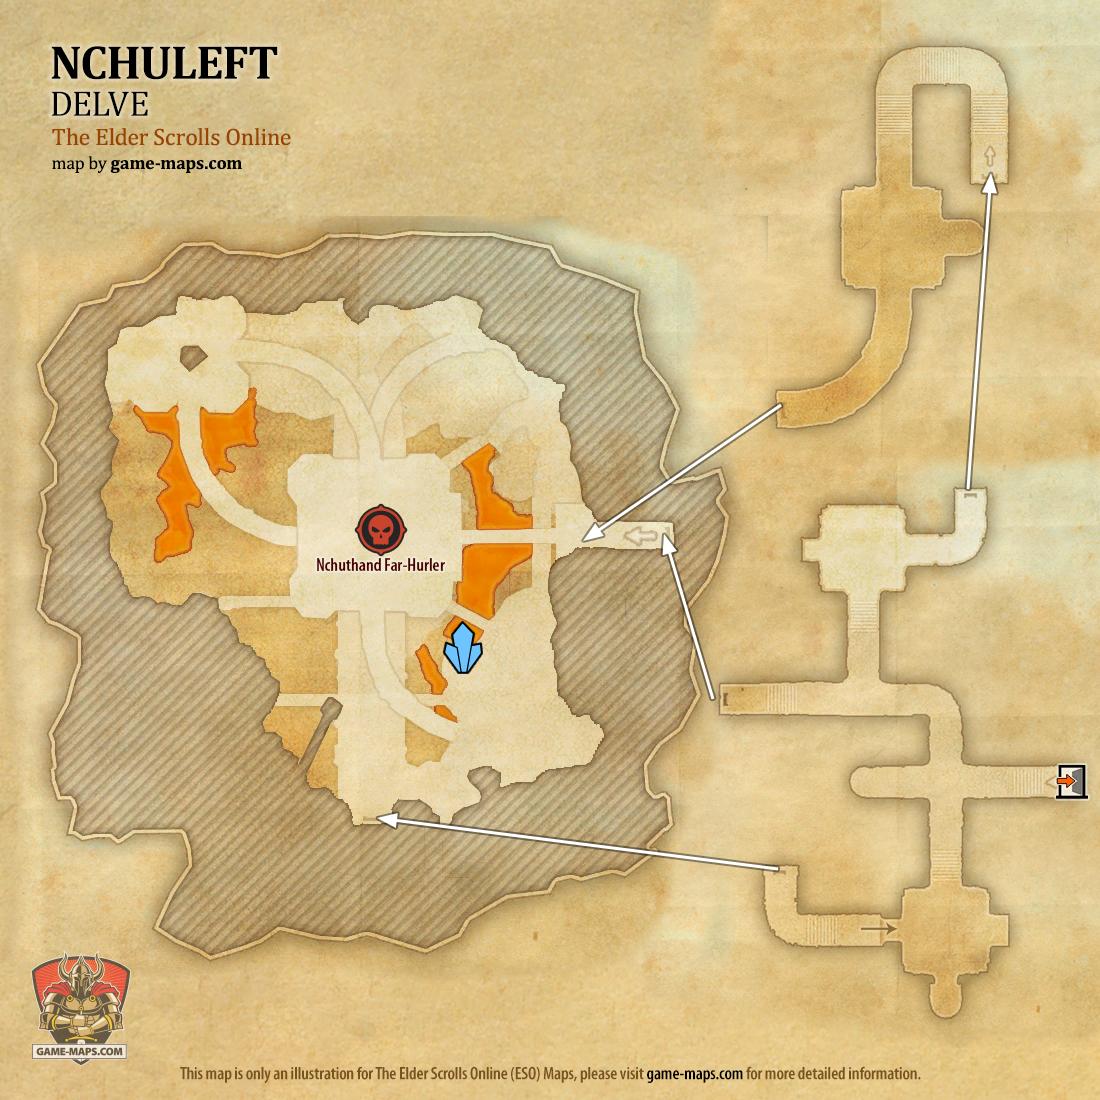 ESO Nchuleft Delve Map with Skyshard and Boss location in Vvardenfell